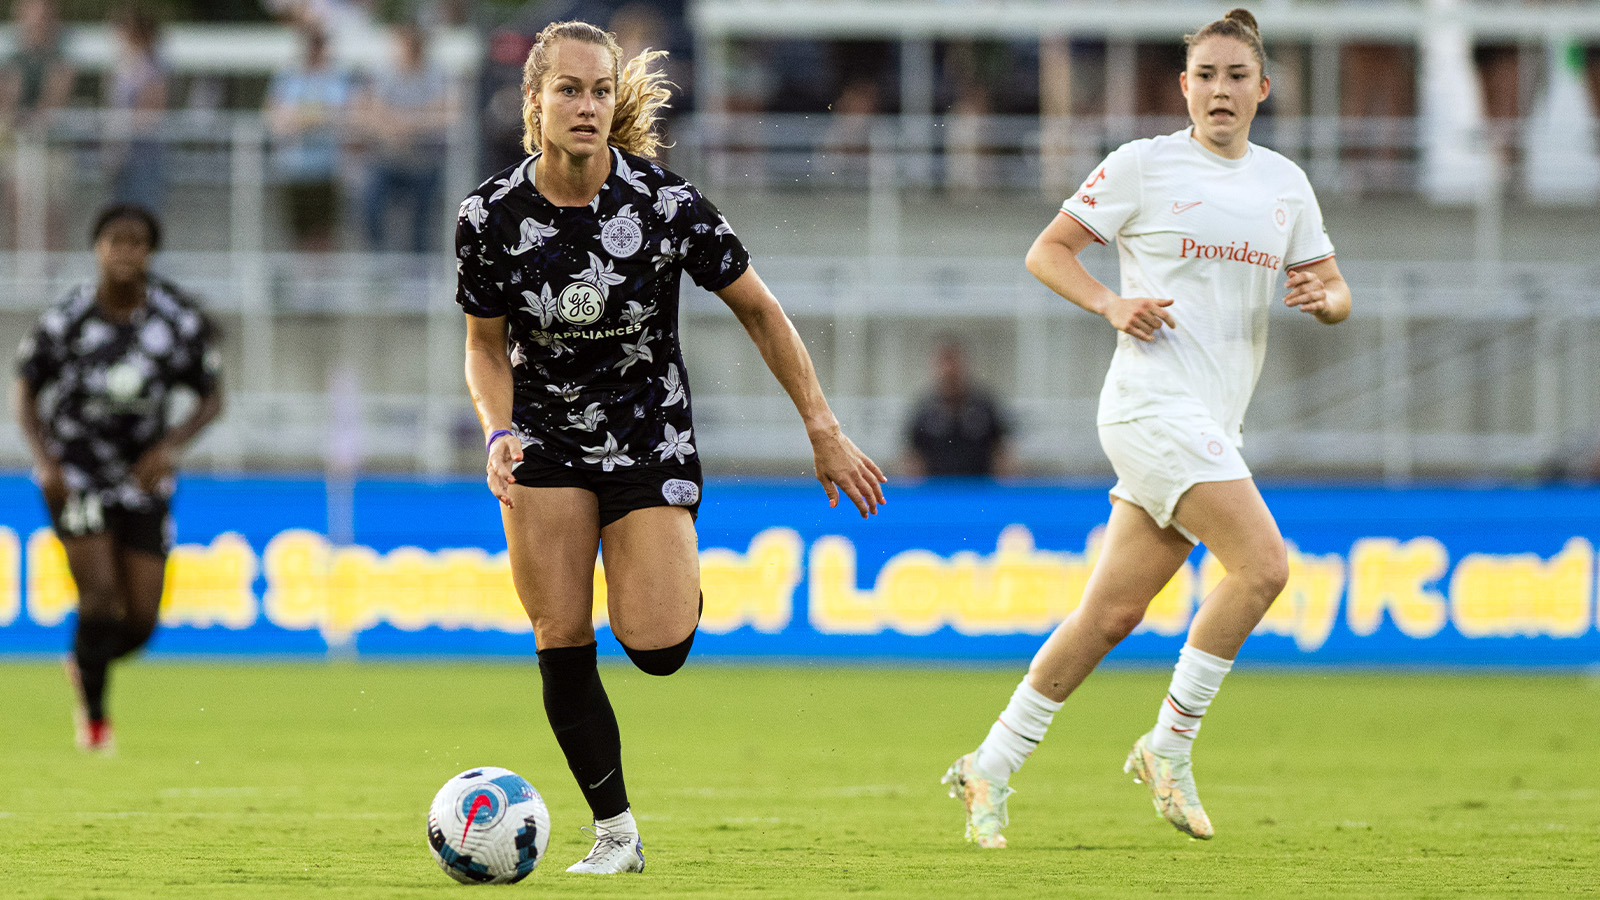 Howell’s call-up makes it a Racing trio for USWNT friendlies